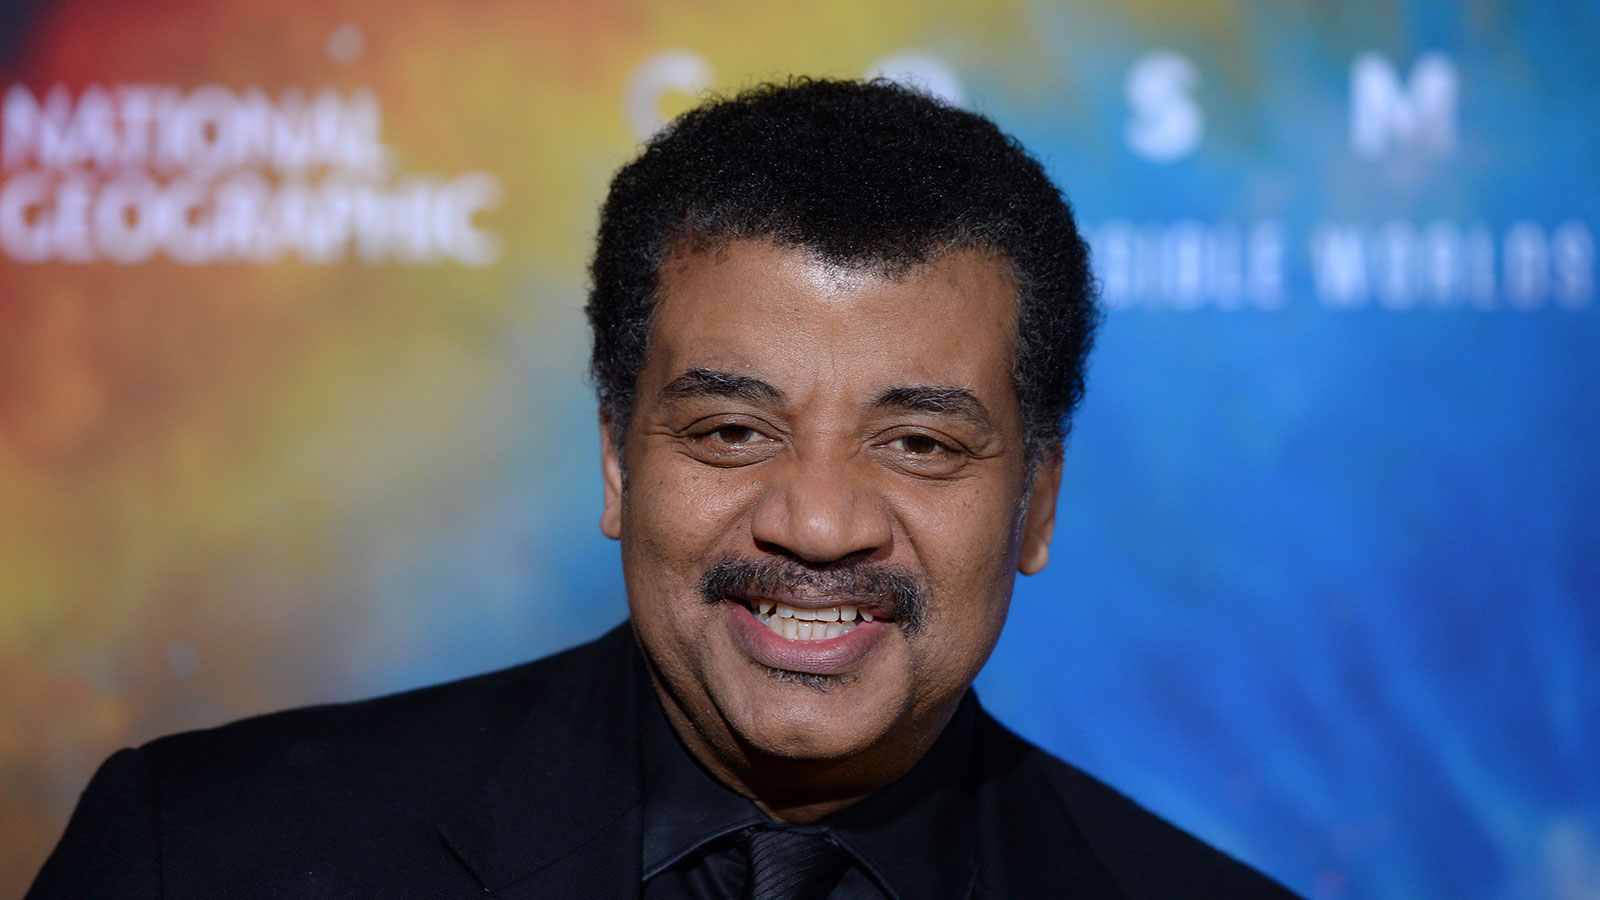 Neil deGrasse Tyson smiling in this photo